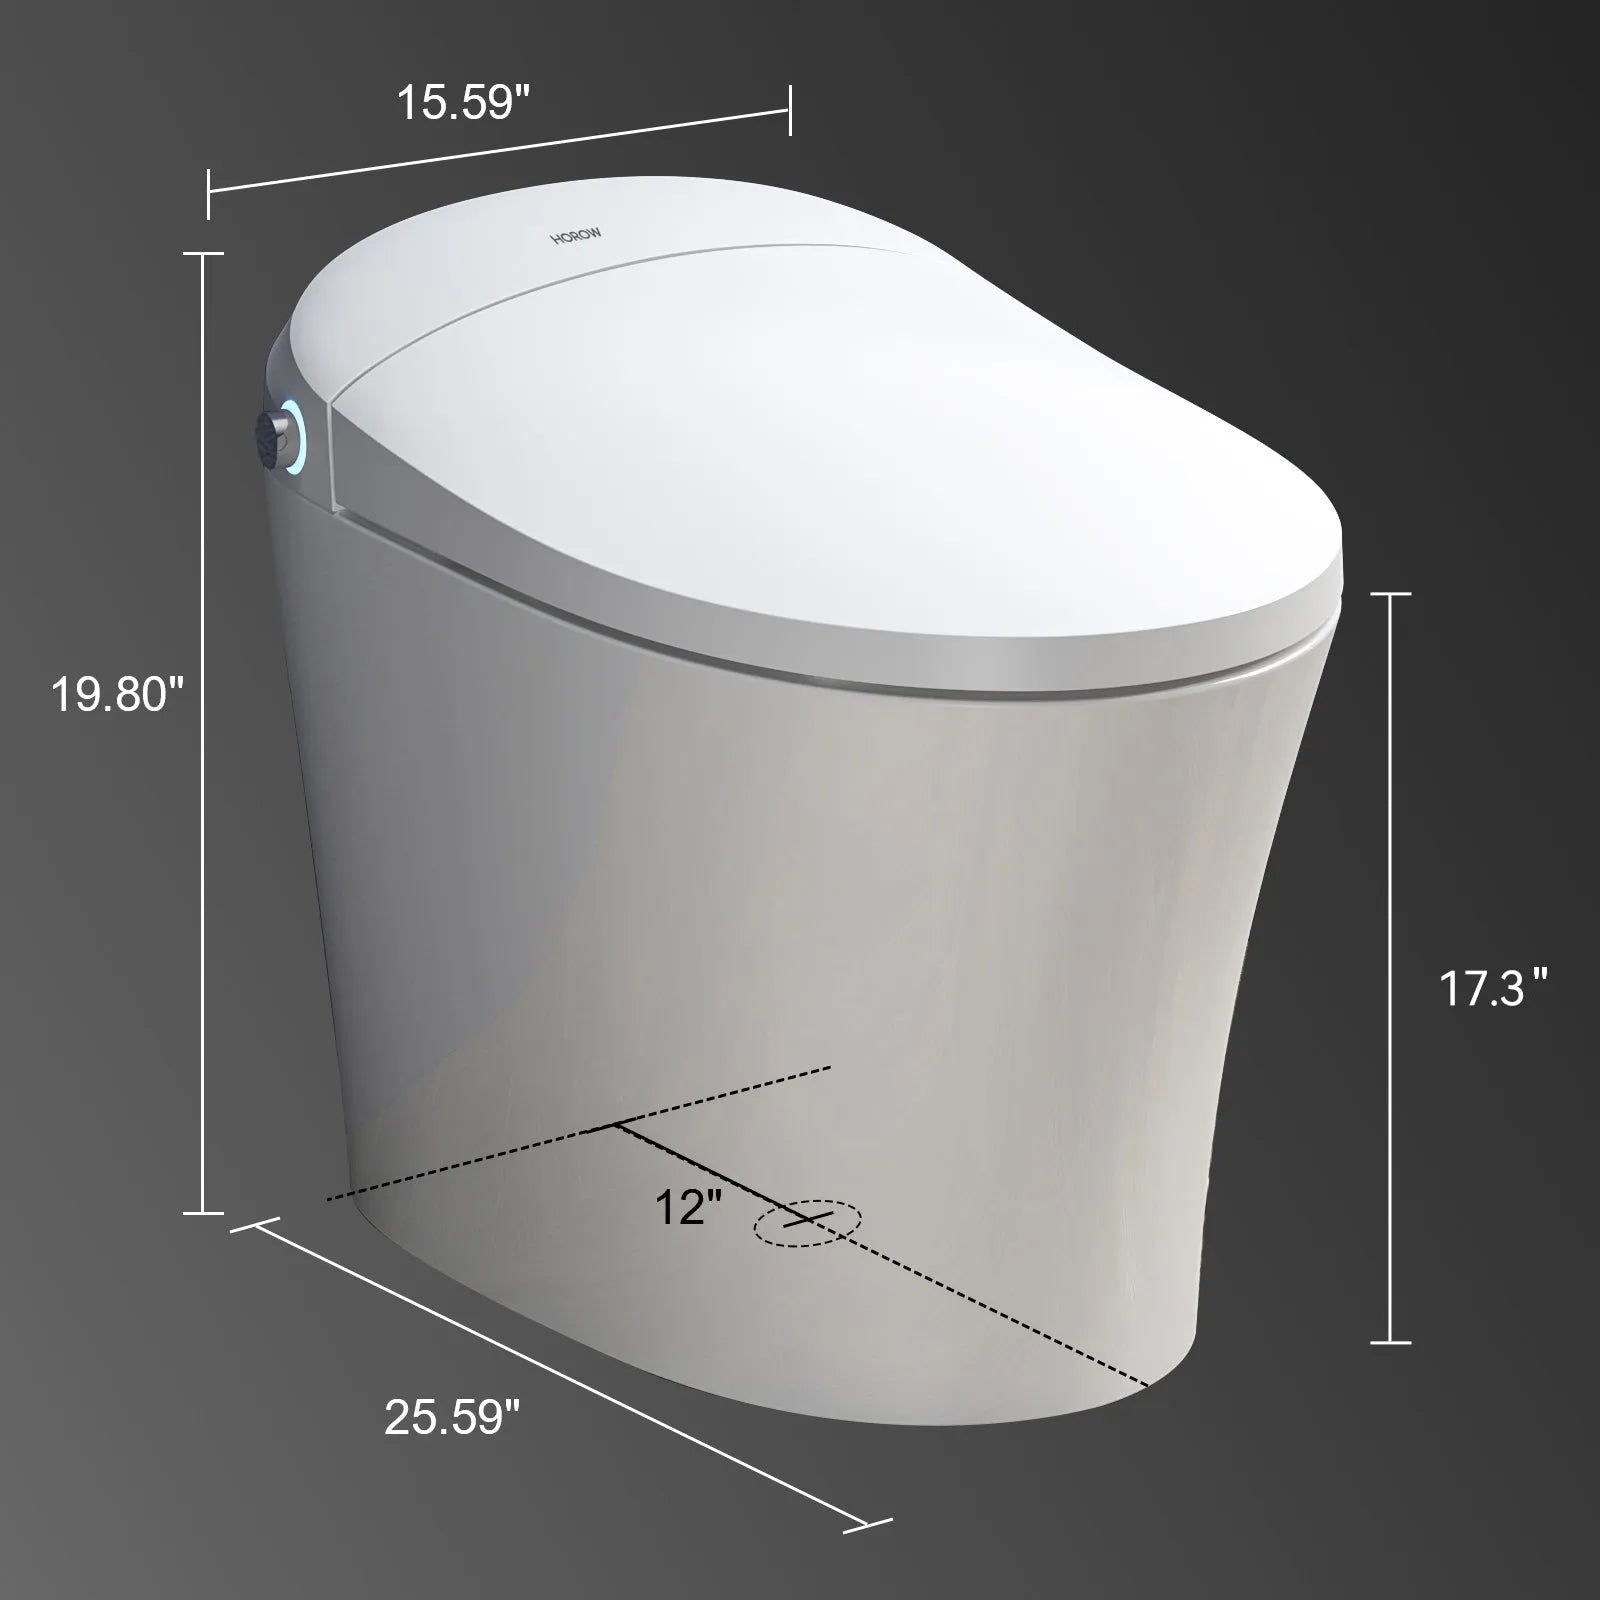 HOROW Smart Toilet with ADA and Heated Seat Model T10A